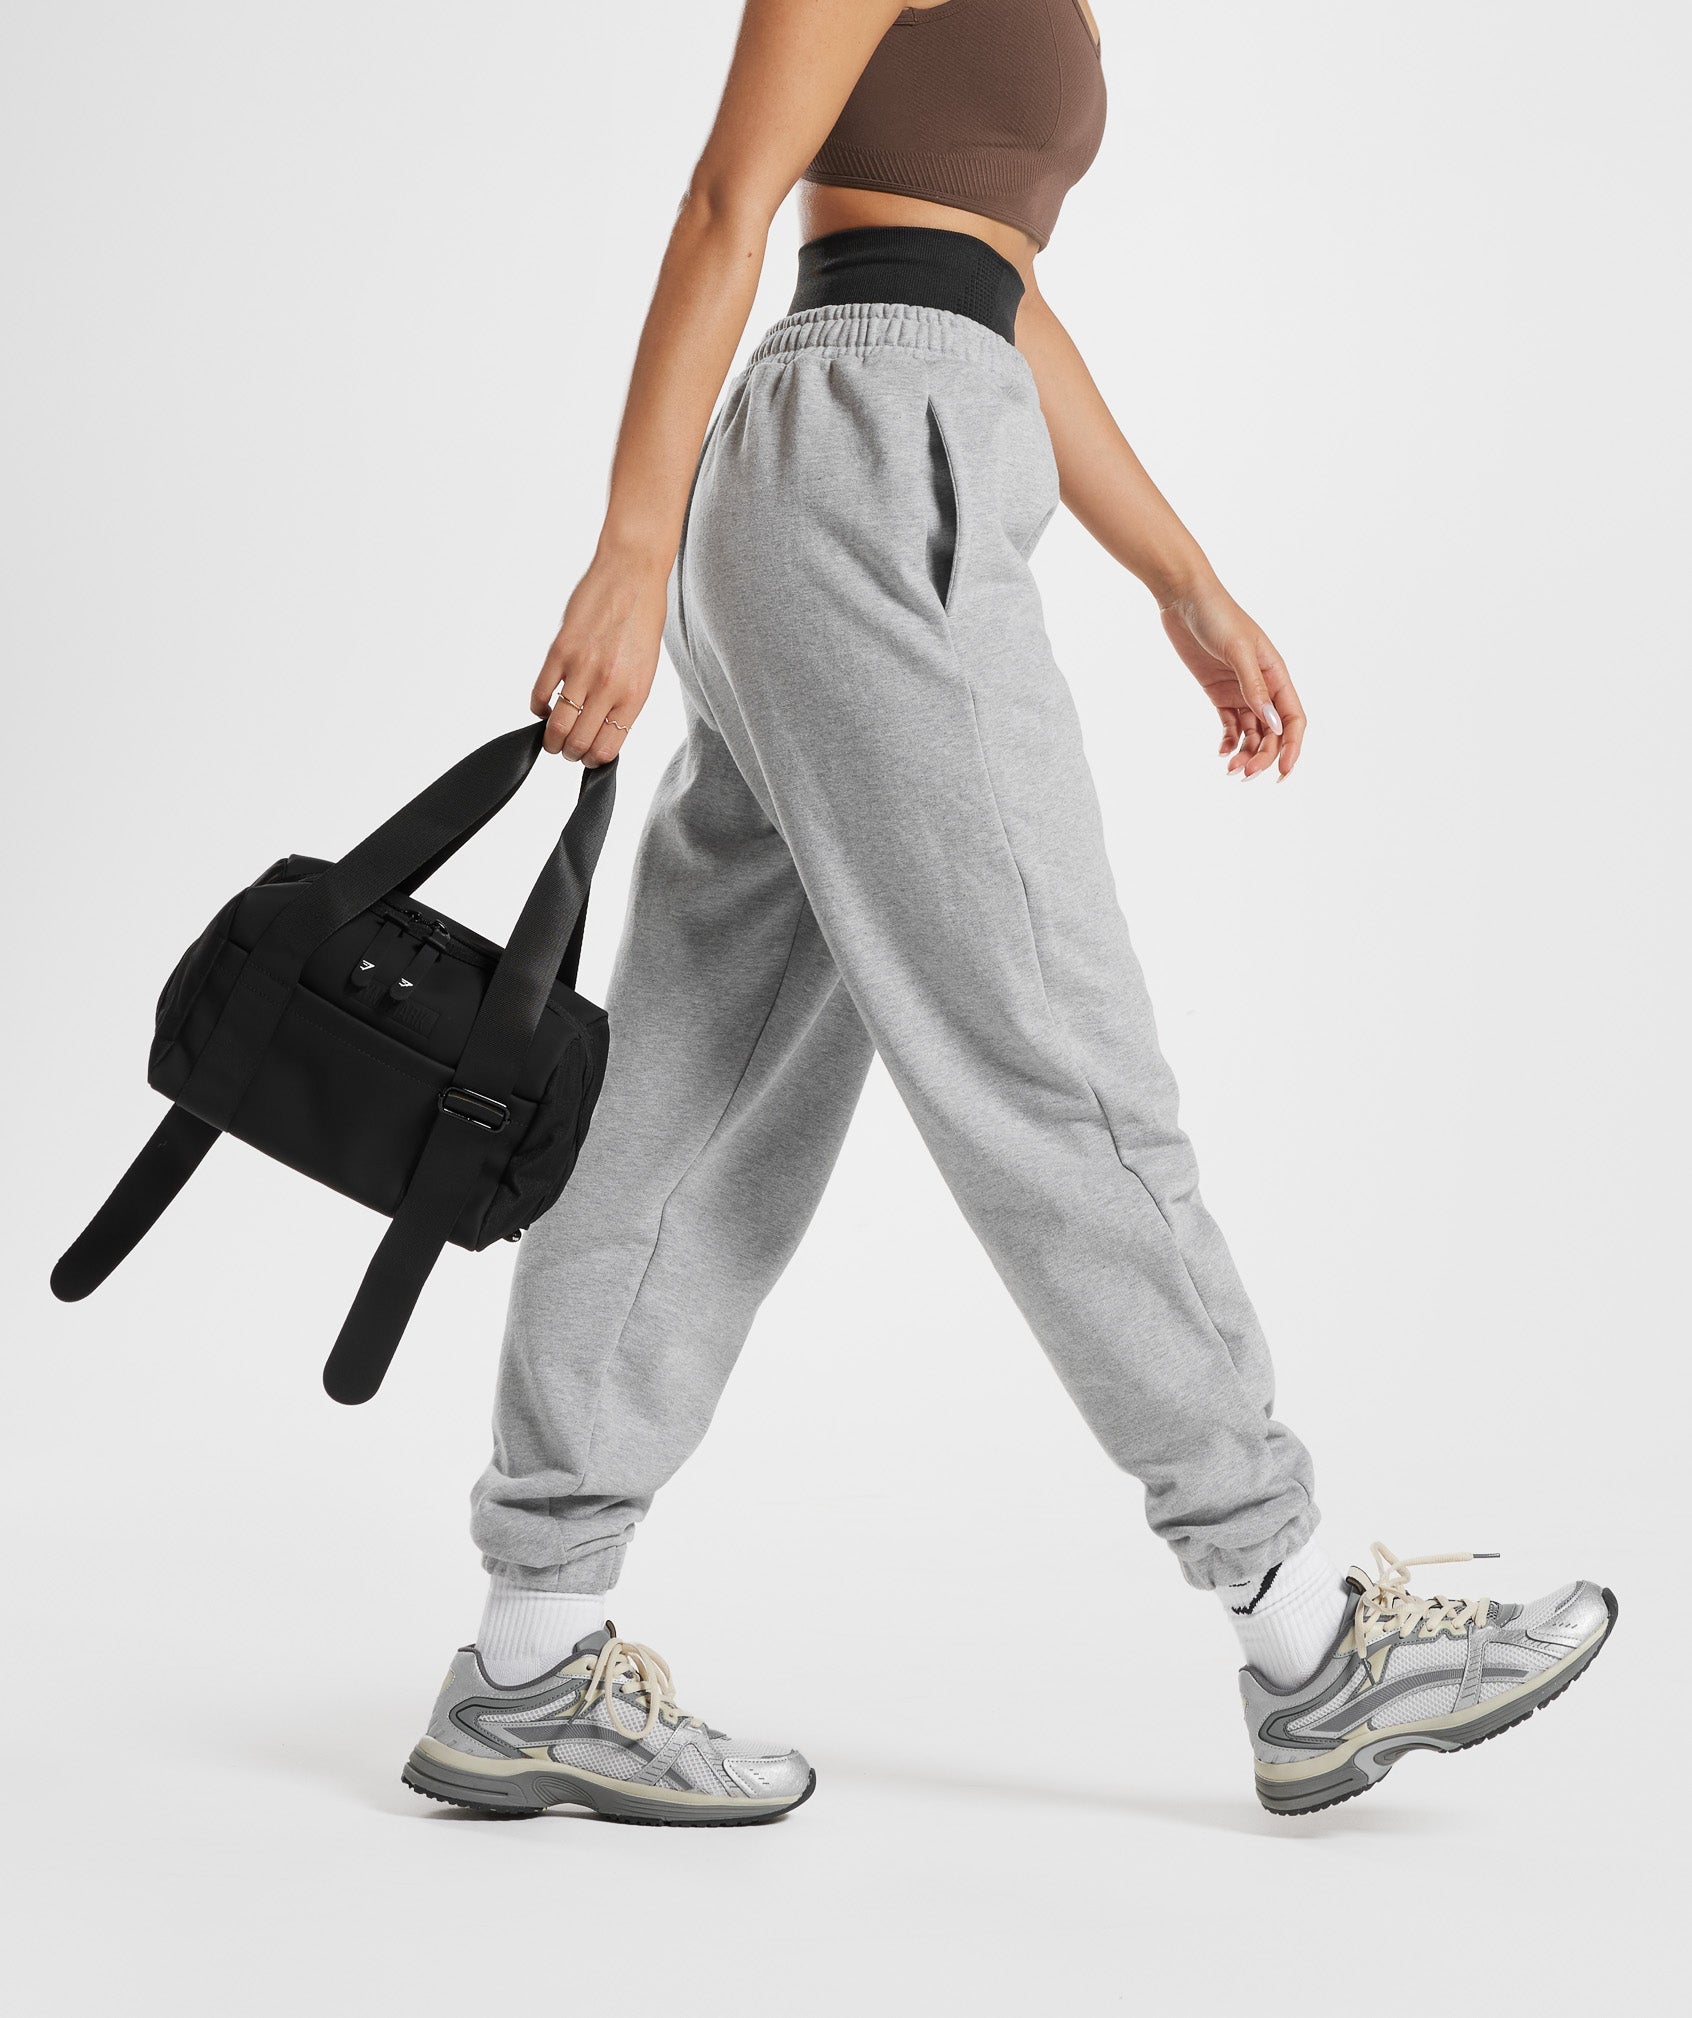 Everyday Mini Gym Bag in Black - view 4